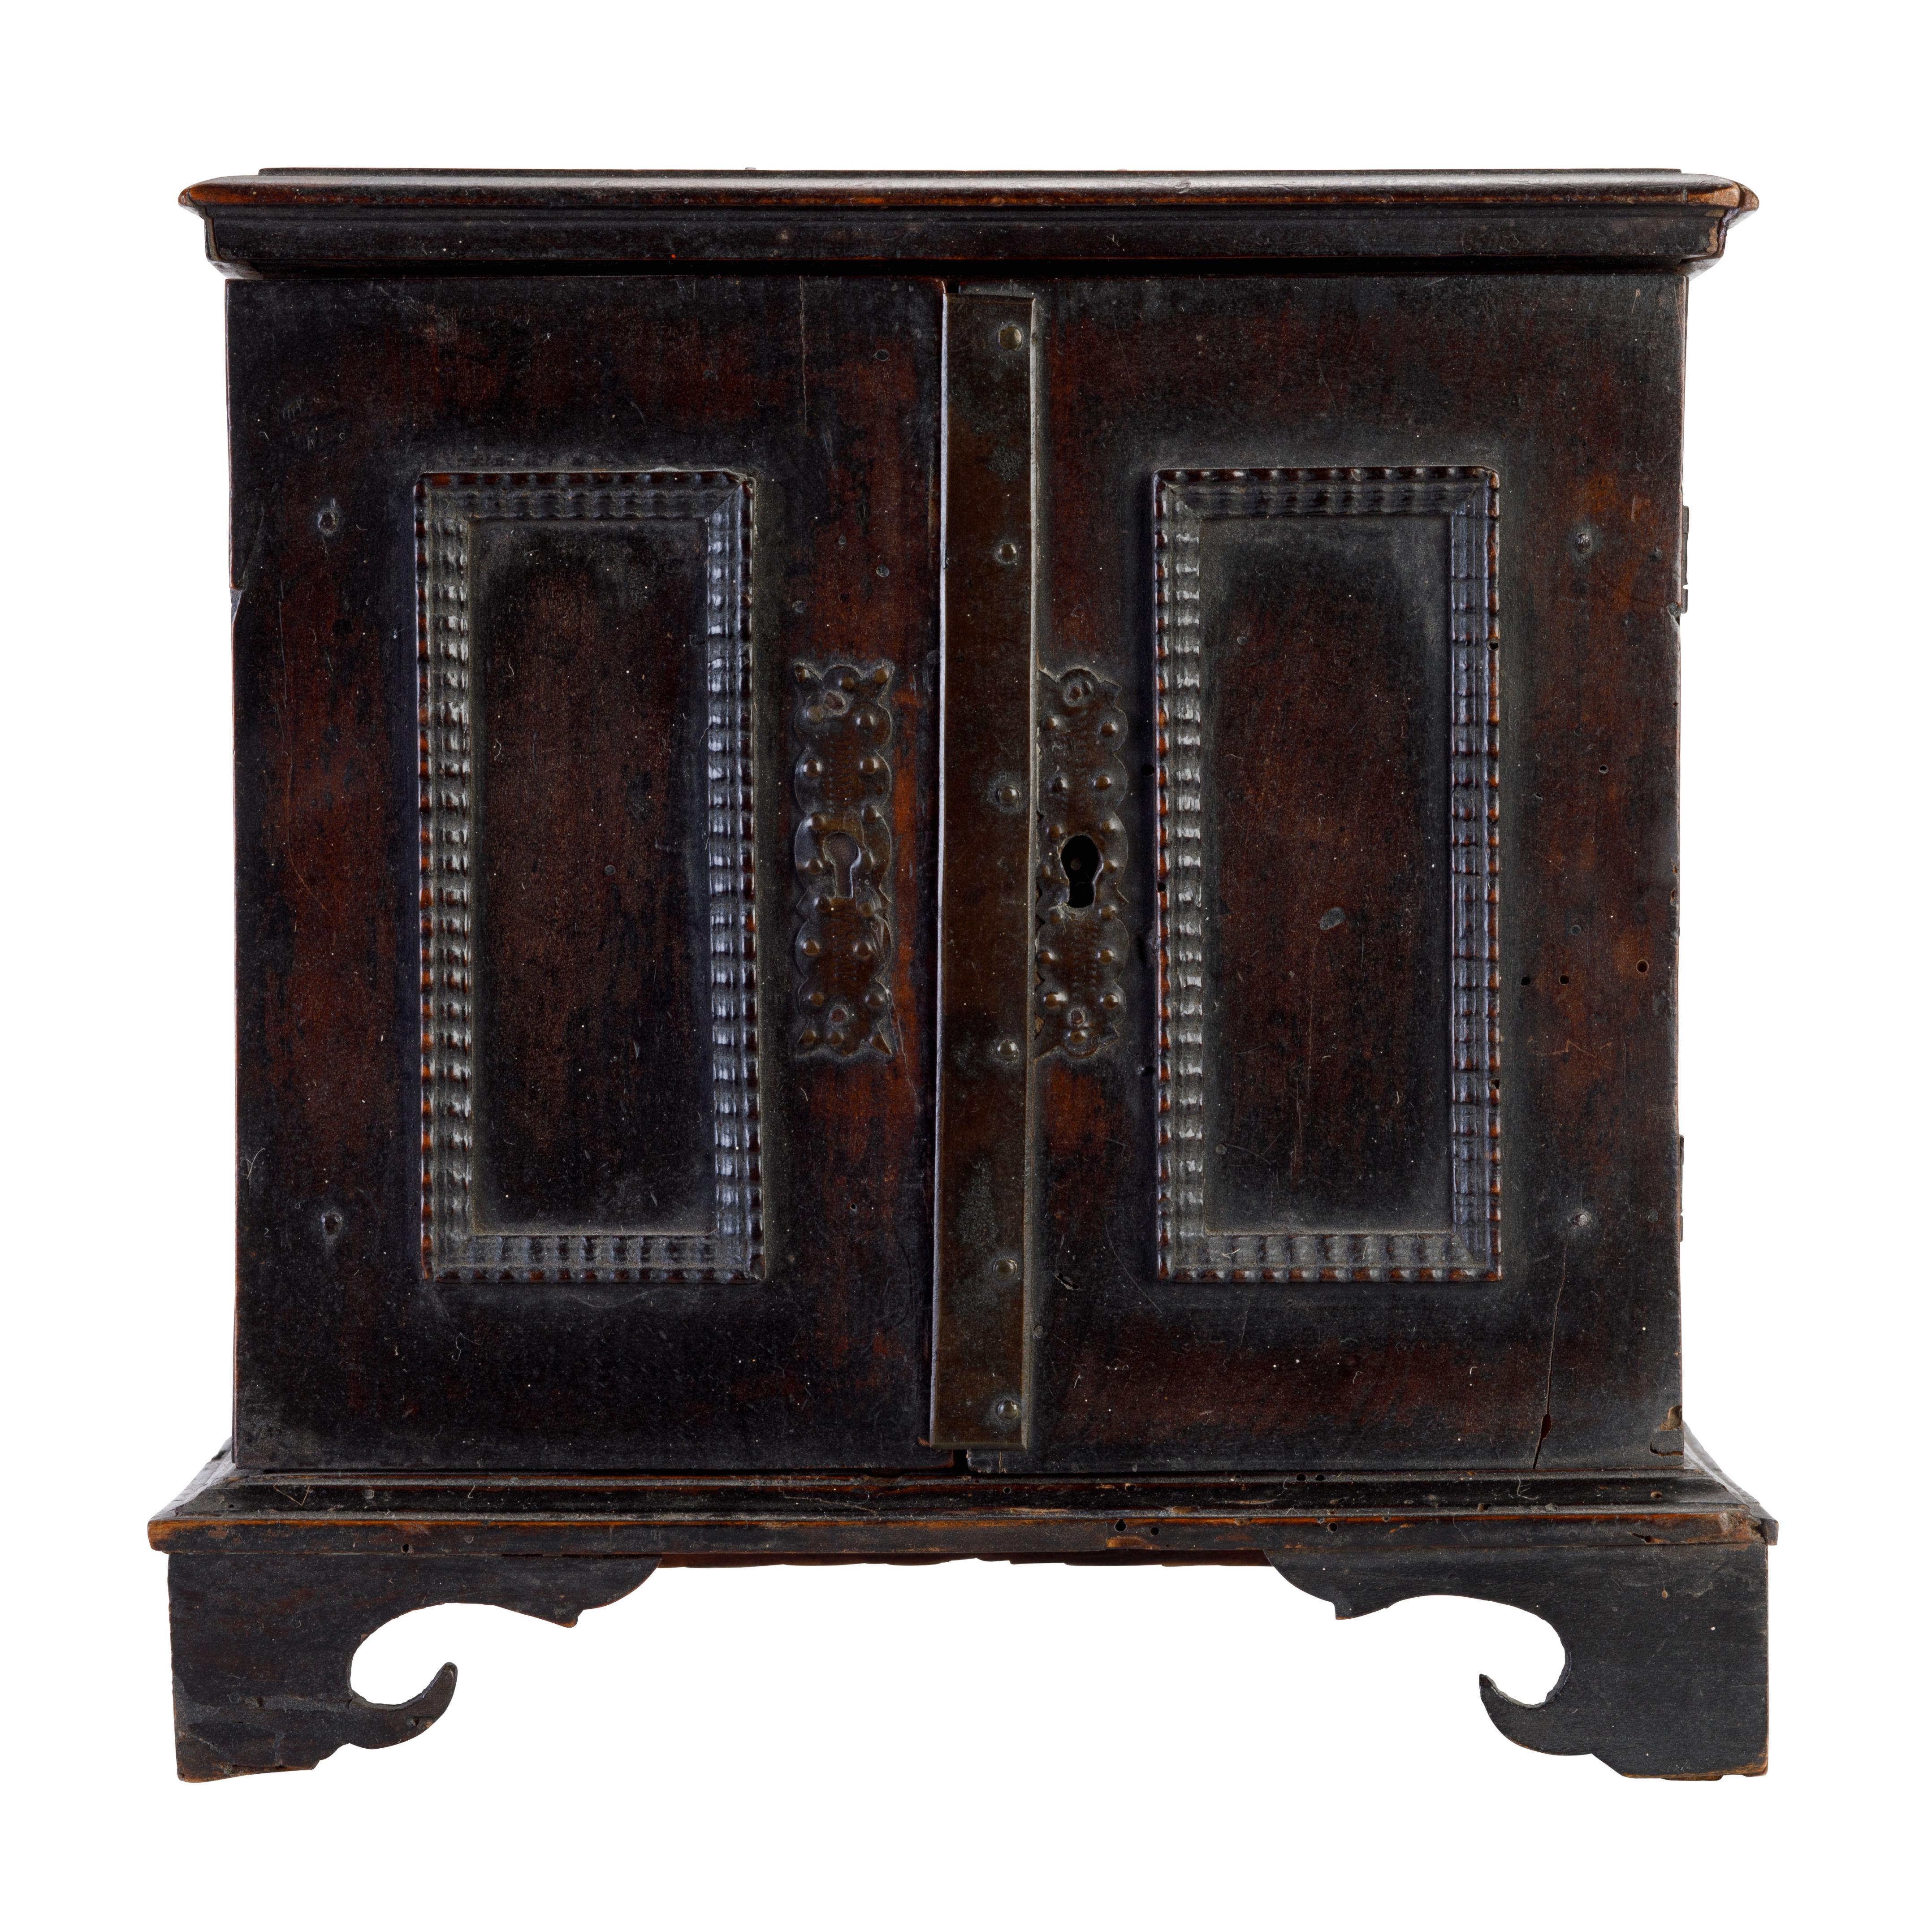 A fine early 18th century walnut table top jewelry cabinet, the doors opening to reveal mirrored glass drawers, with marbled paper linings.